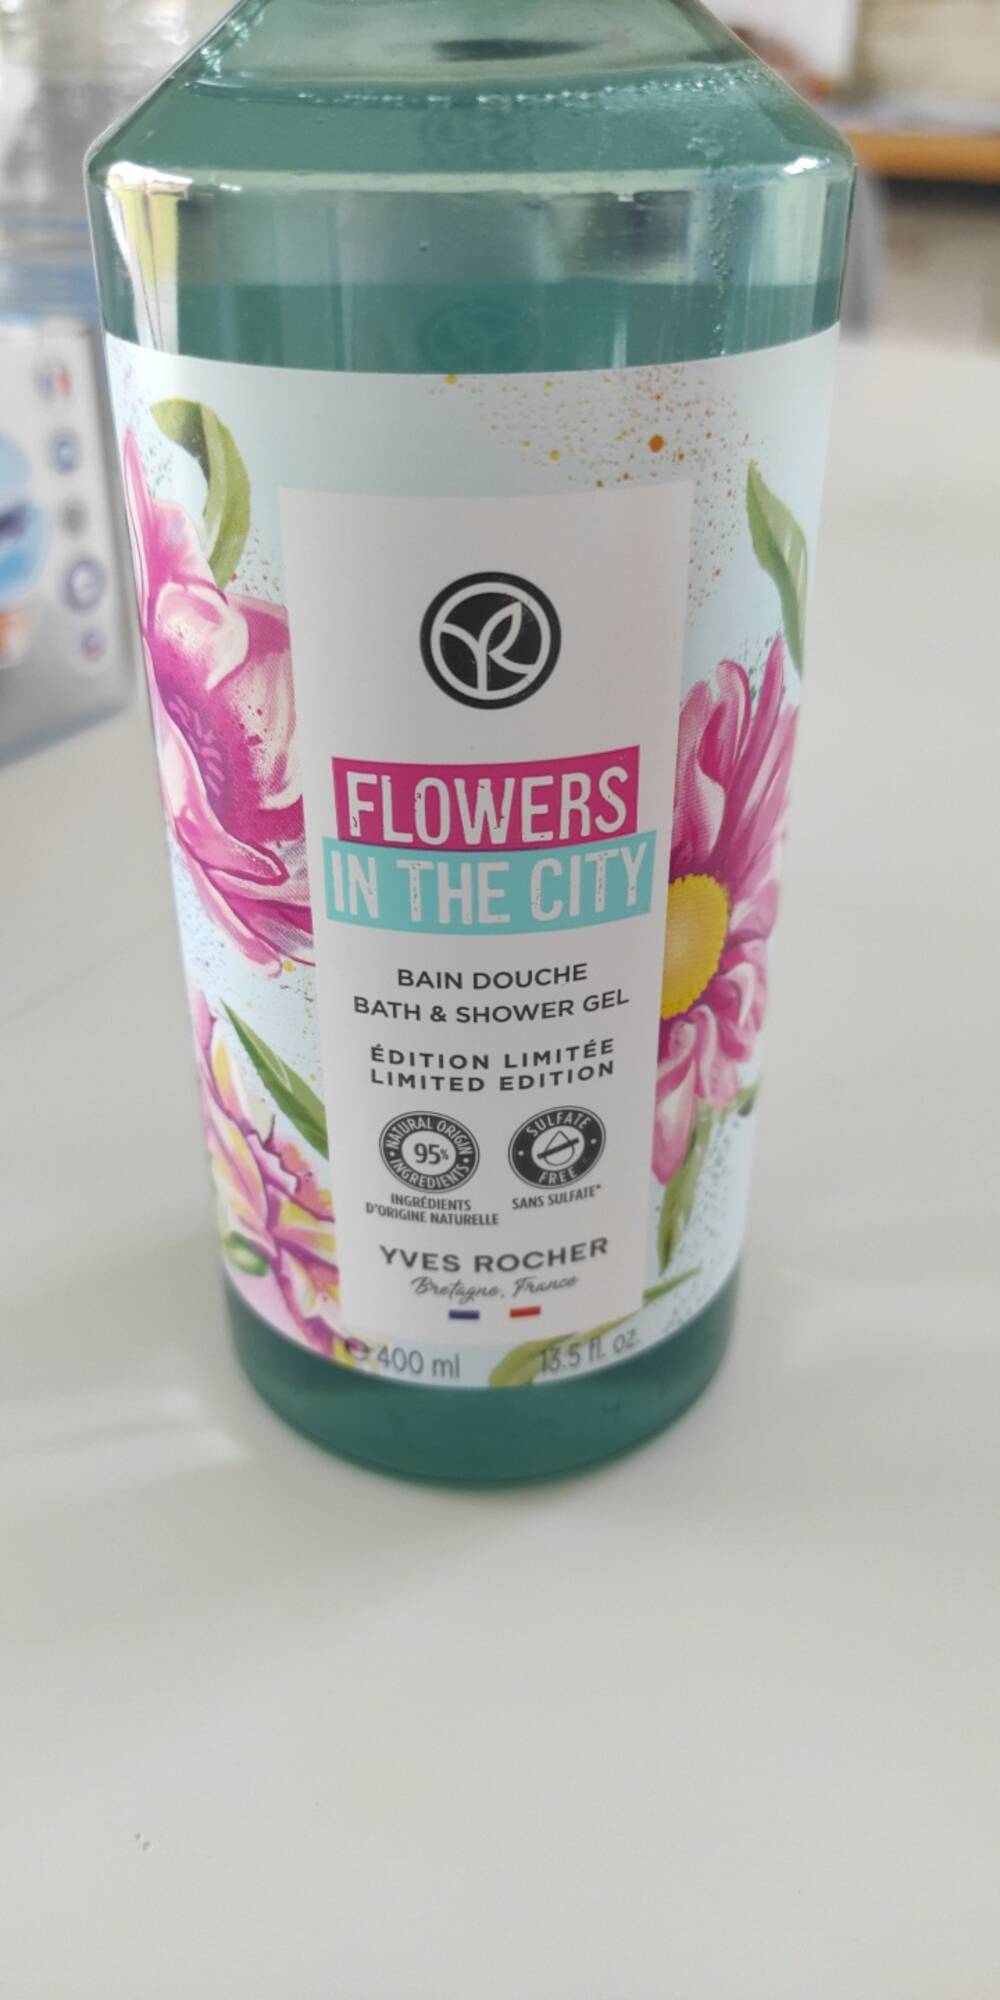 YVES ROCHER - Flowers in the city - Bain douche